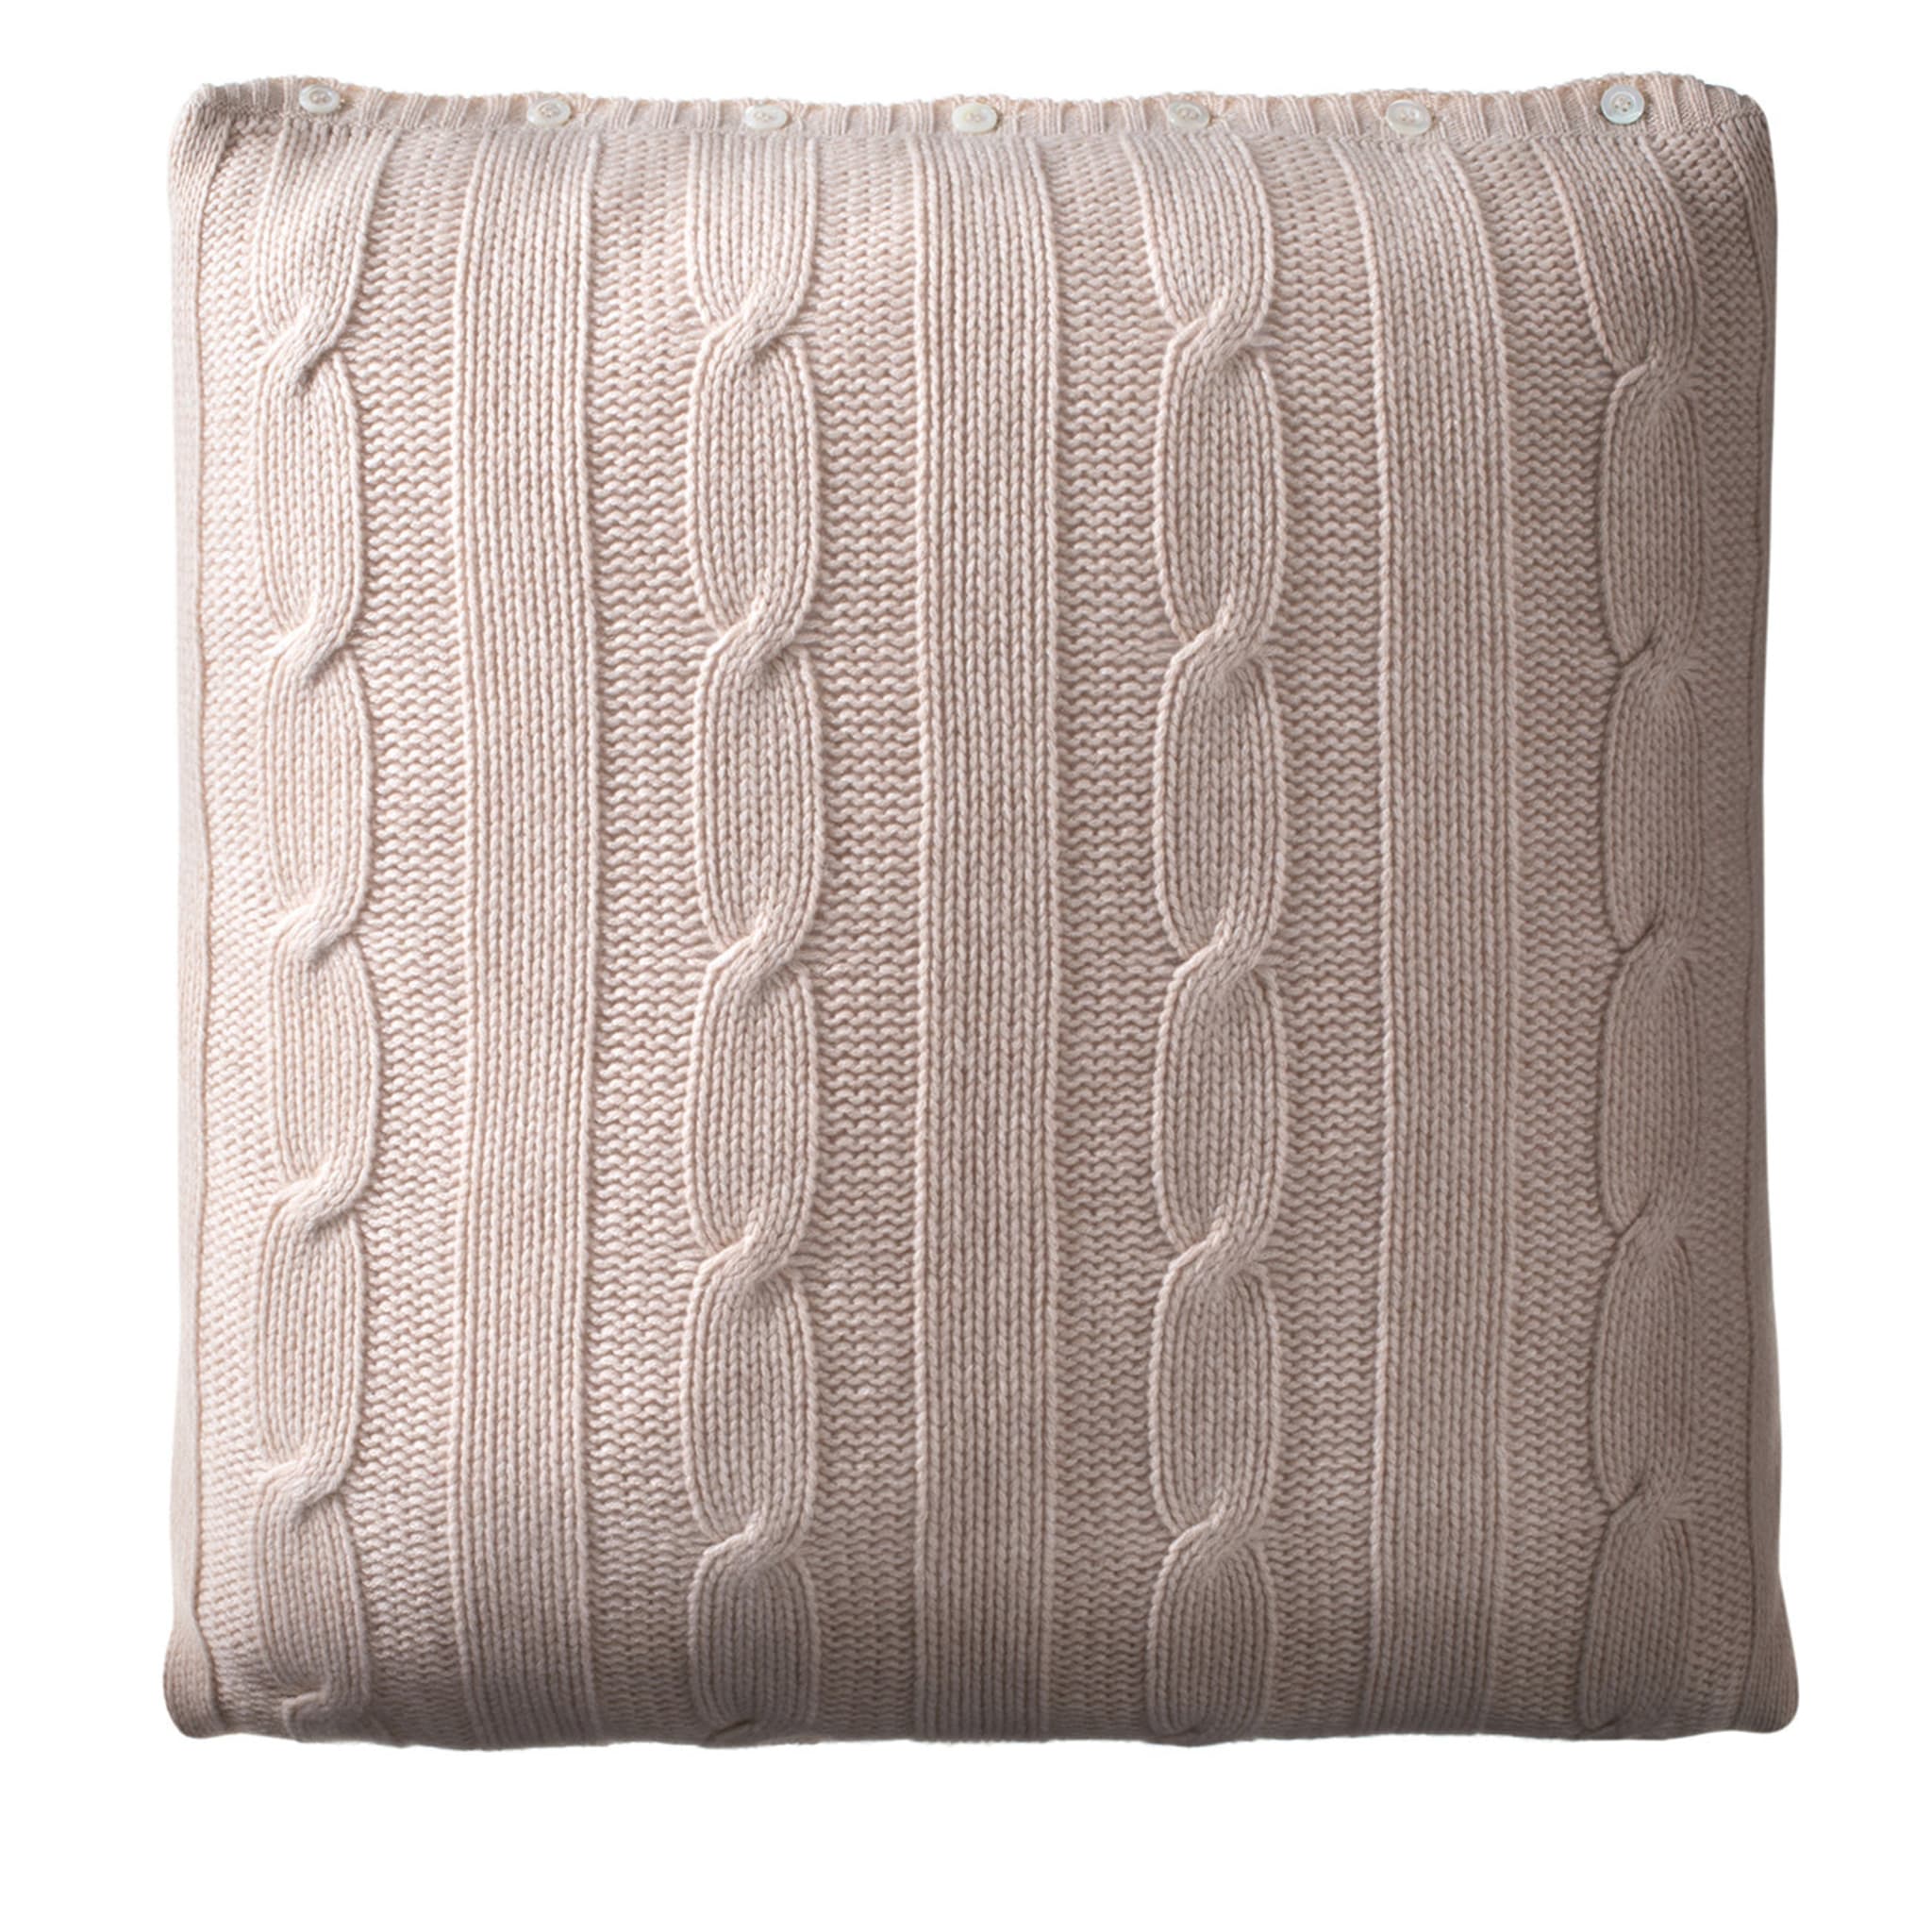 Beige Cable-Knit Square Cushion - Main view